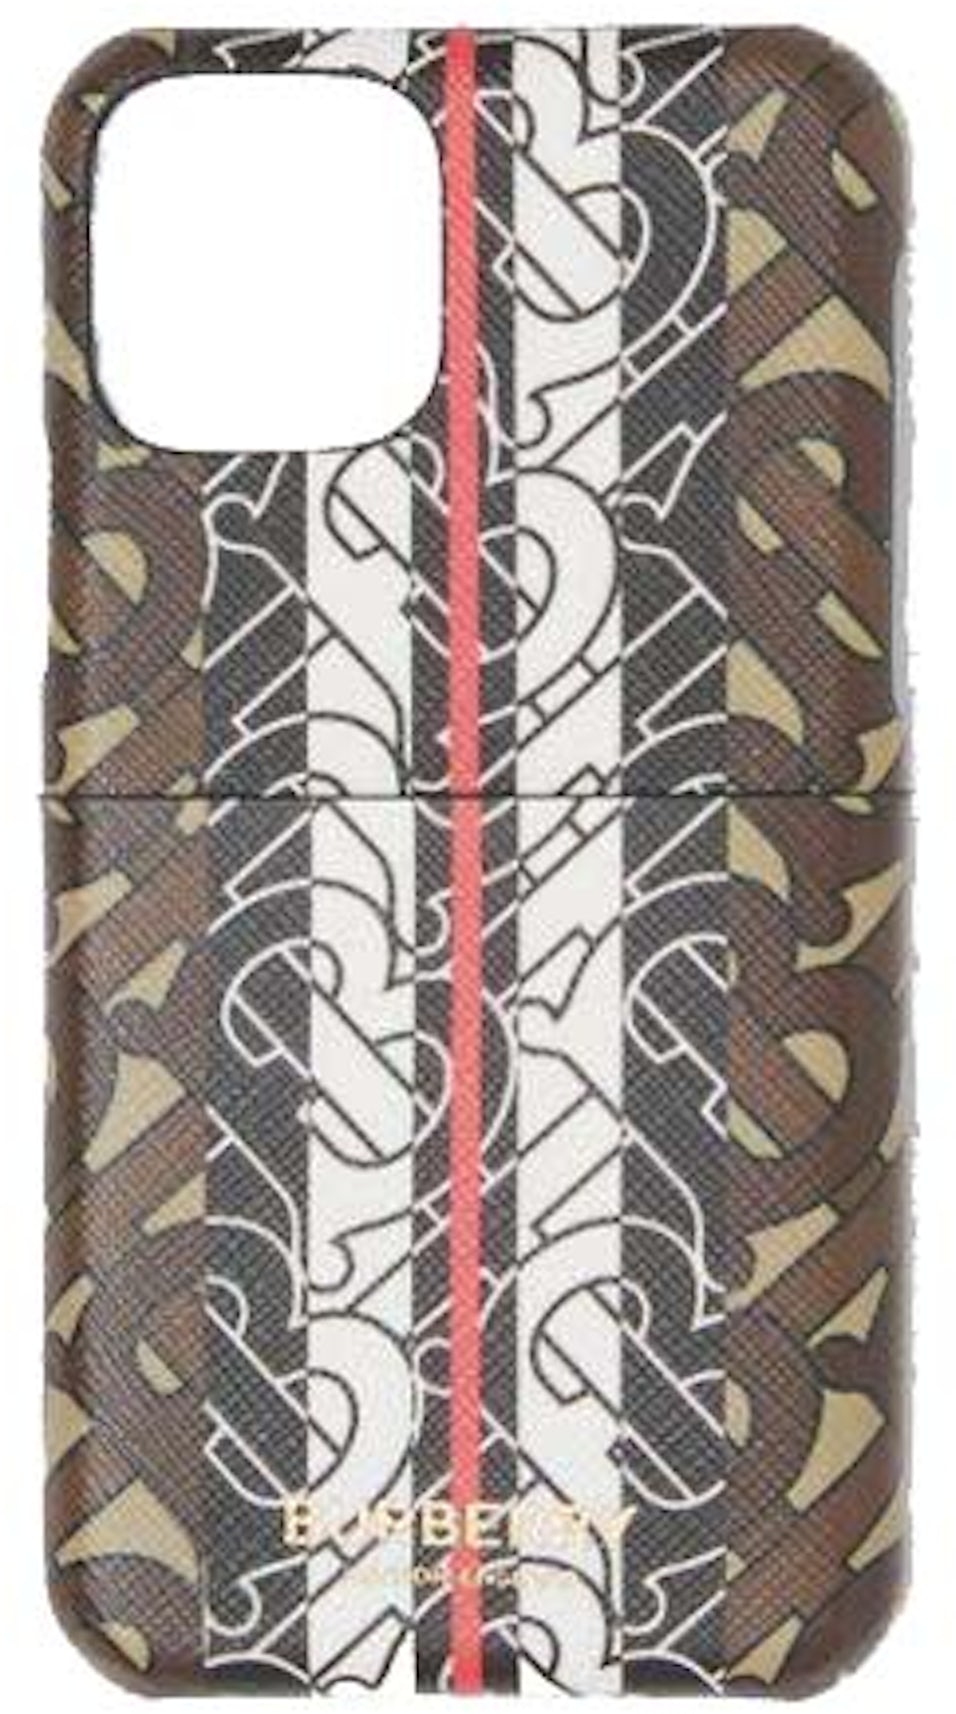 Iphone 11 black and gold louis vuitton phone case